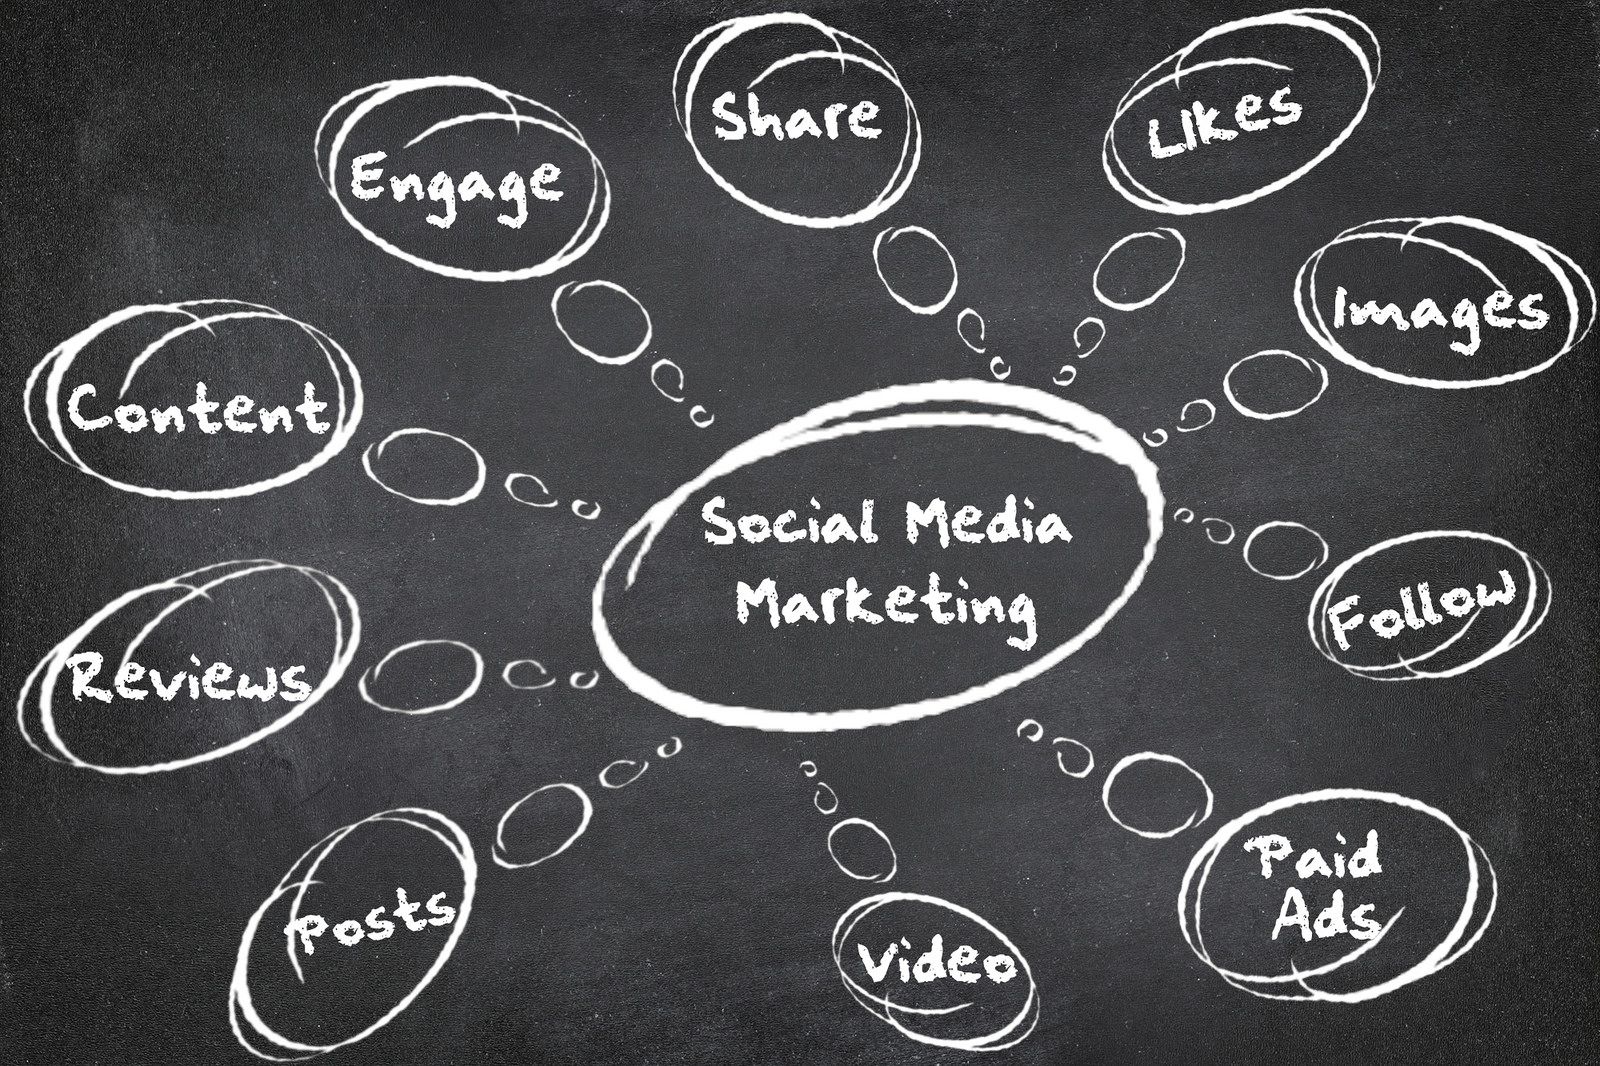 Doing social media engagement right: what to focus on while building your online presence